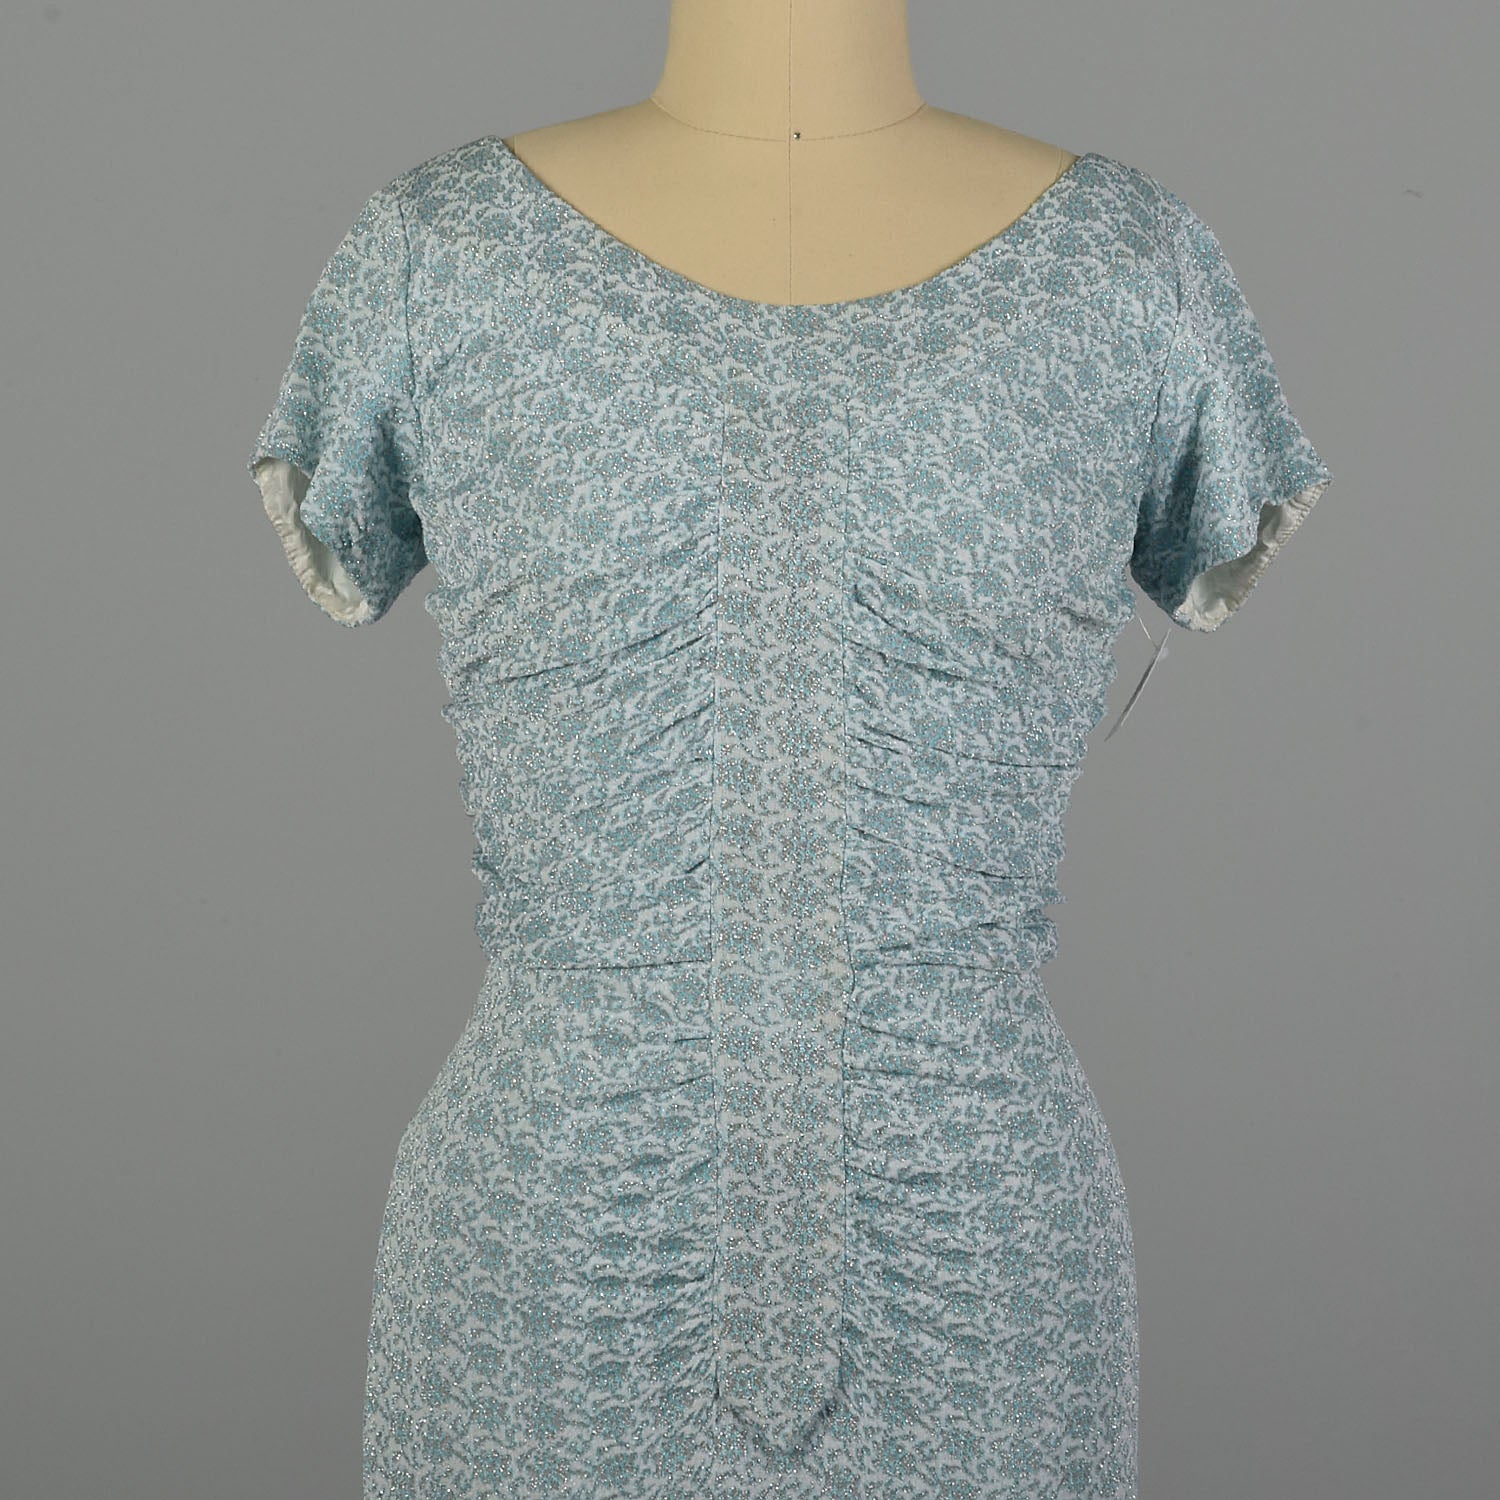 Small 1960s Blue and White Lurex Floral Print Knit Dress